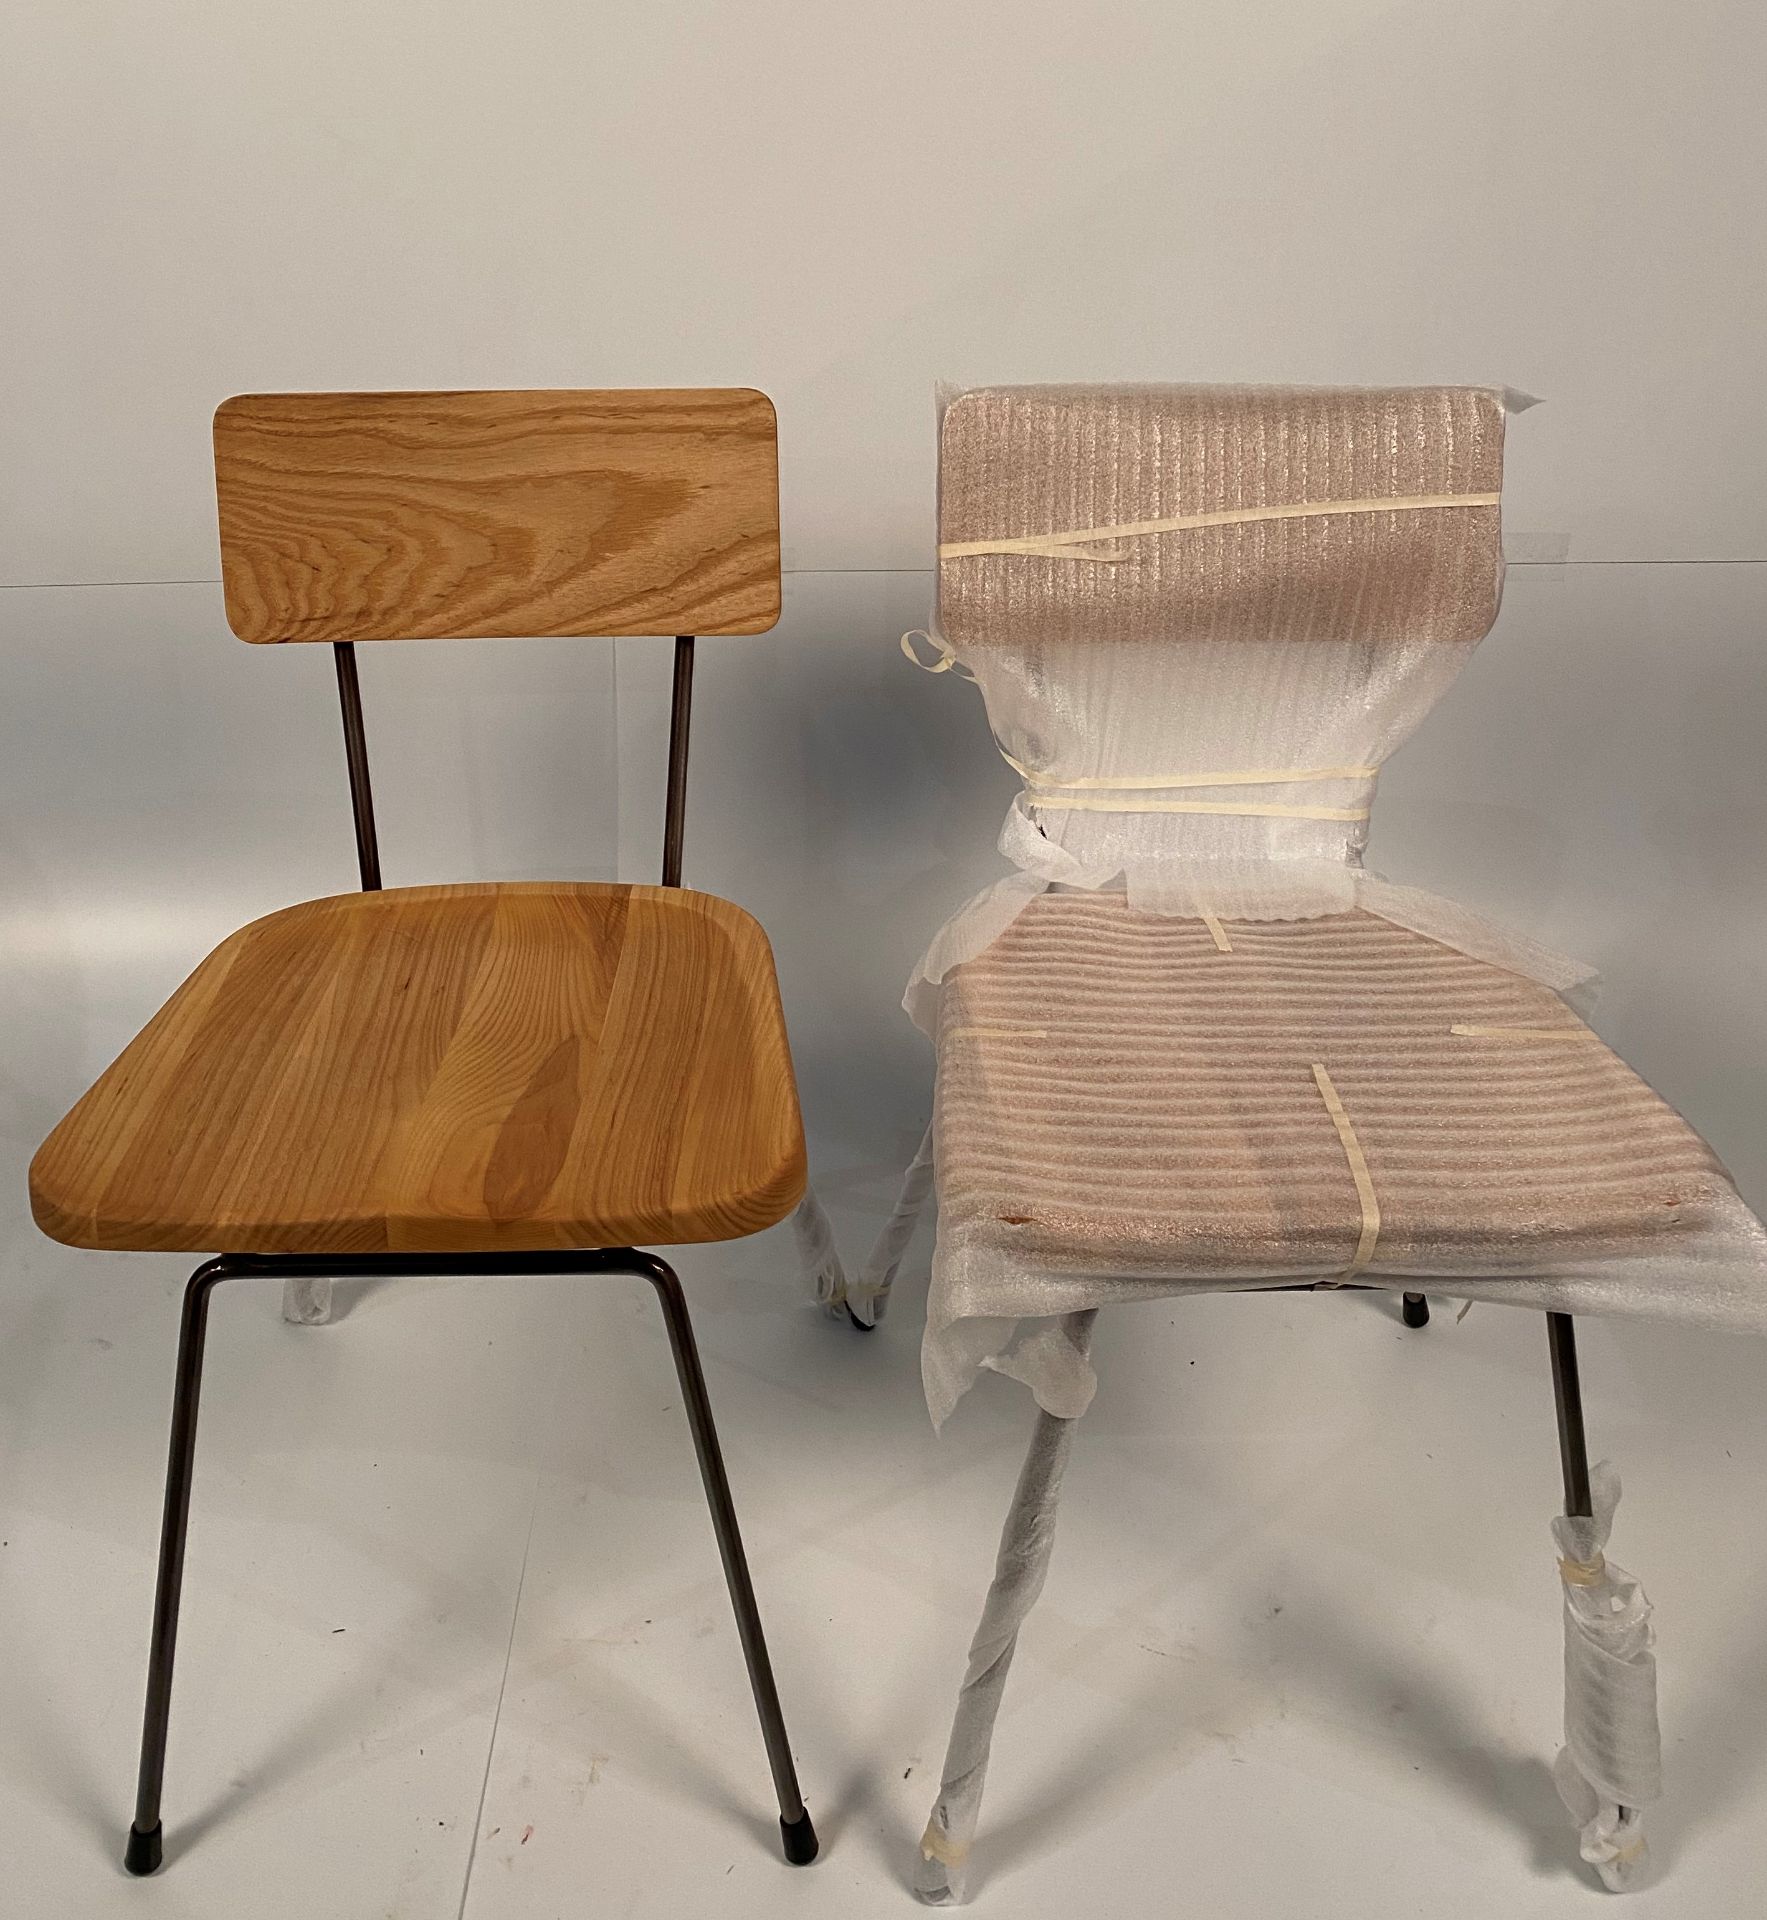 3 x College wooden chairs with metal frames